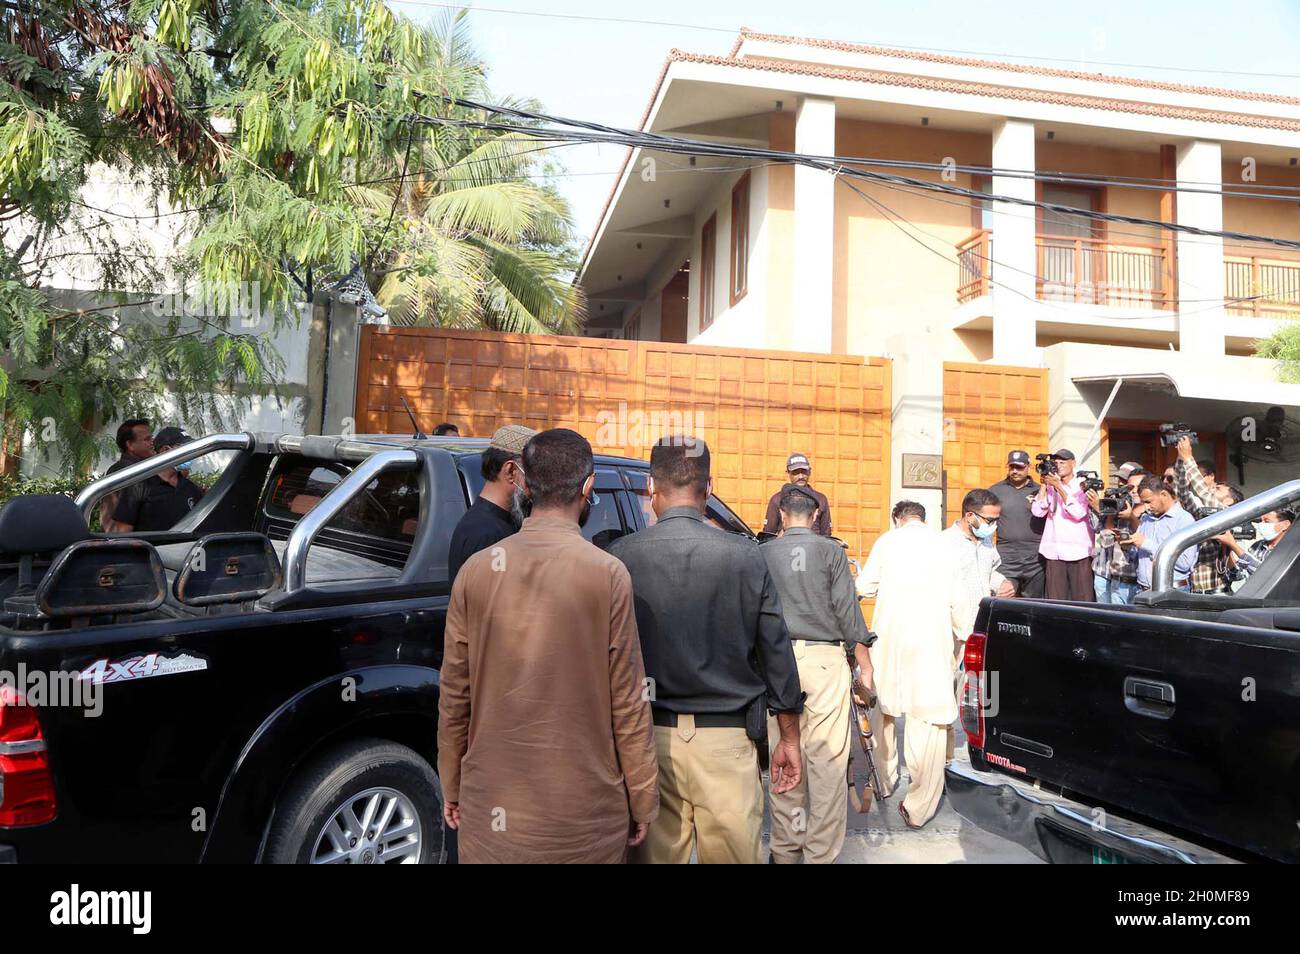 National Accountability Bureau (NAB) Karachi team officials raid the residence of Sindh Assembly Speaker Agha Siraj Durrani, seeking his arrest after the Sindh High Court rejected his plea for bail, located on DHA area of Karachi on Wednesday, October 13, 2021. Two special teams have been formed to take Durrani into custody after the Sindh High Court rejected his plea for bail, along with requests filed by 10 other individuals. NAB for allegedly owning assets beyond known sources of income case. Stock Photo